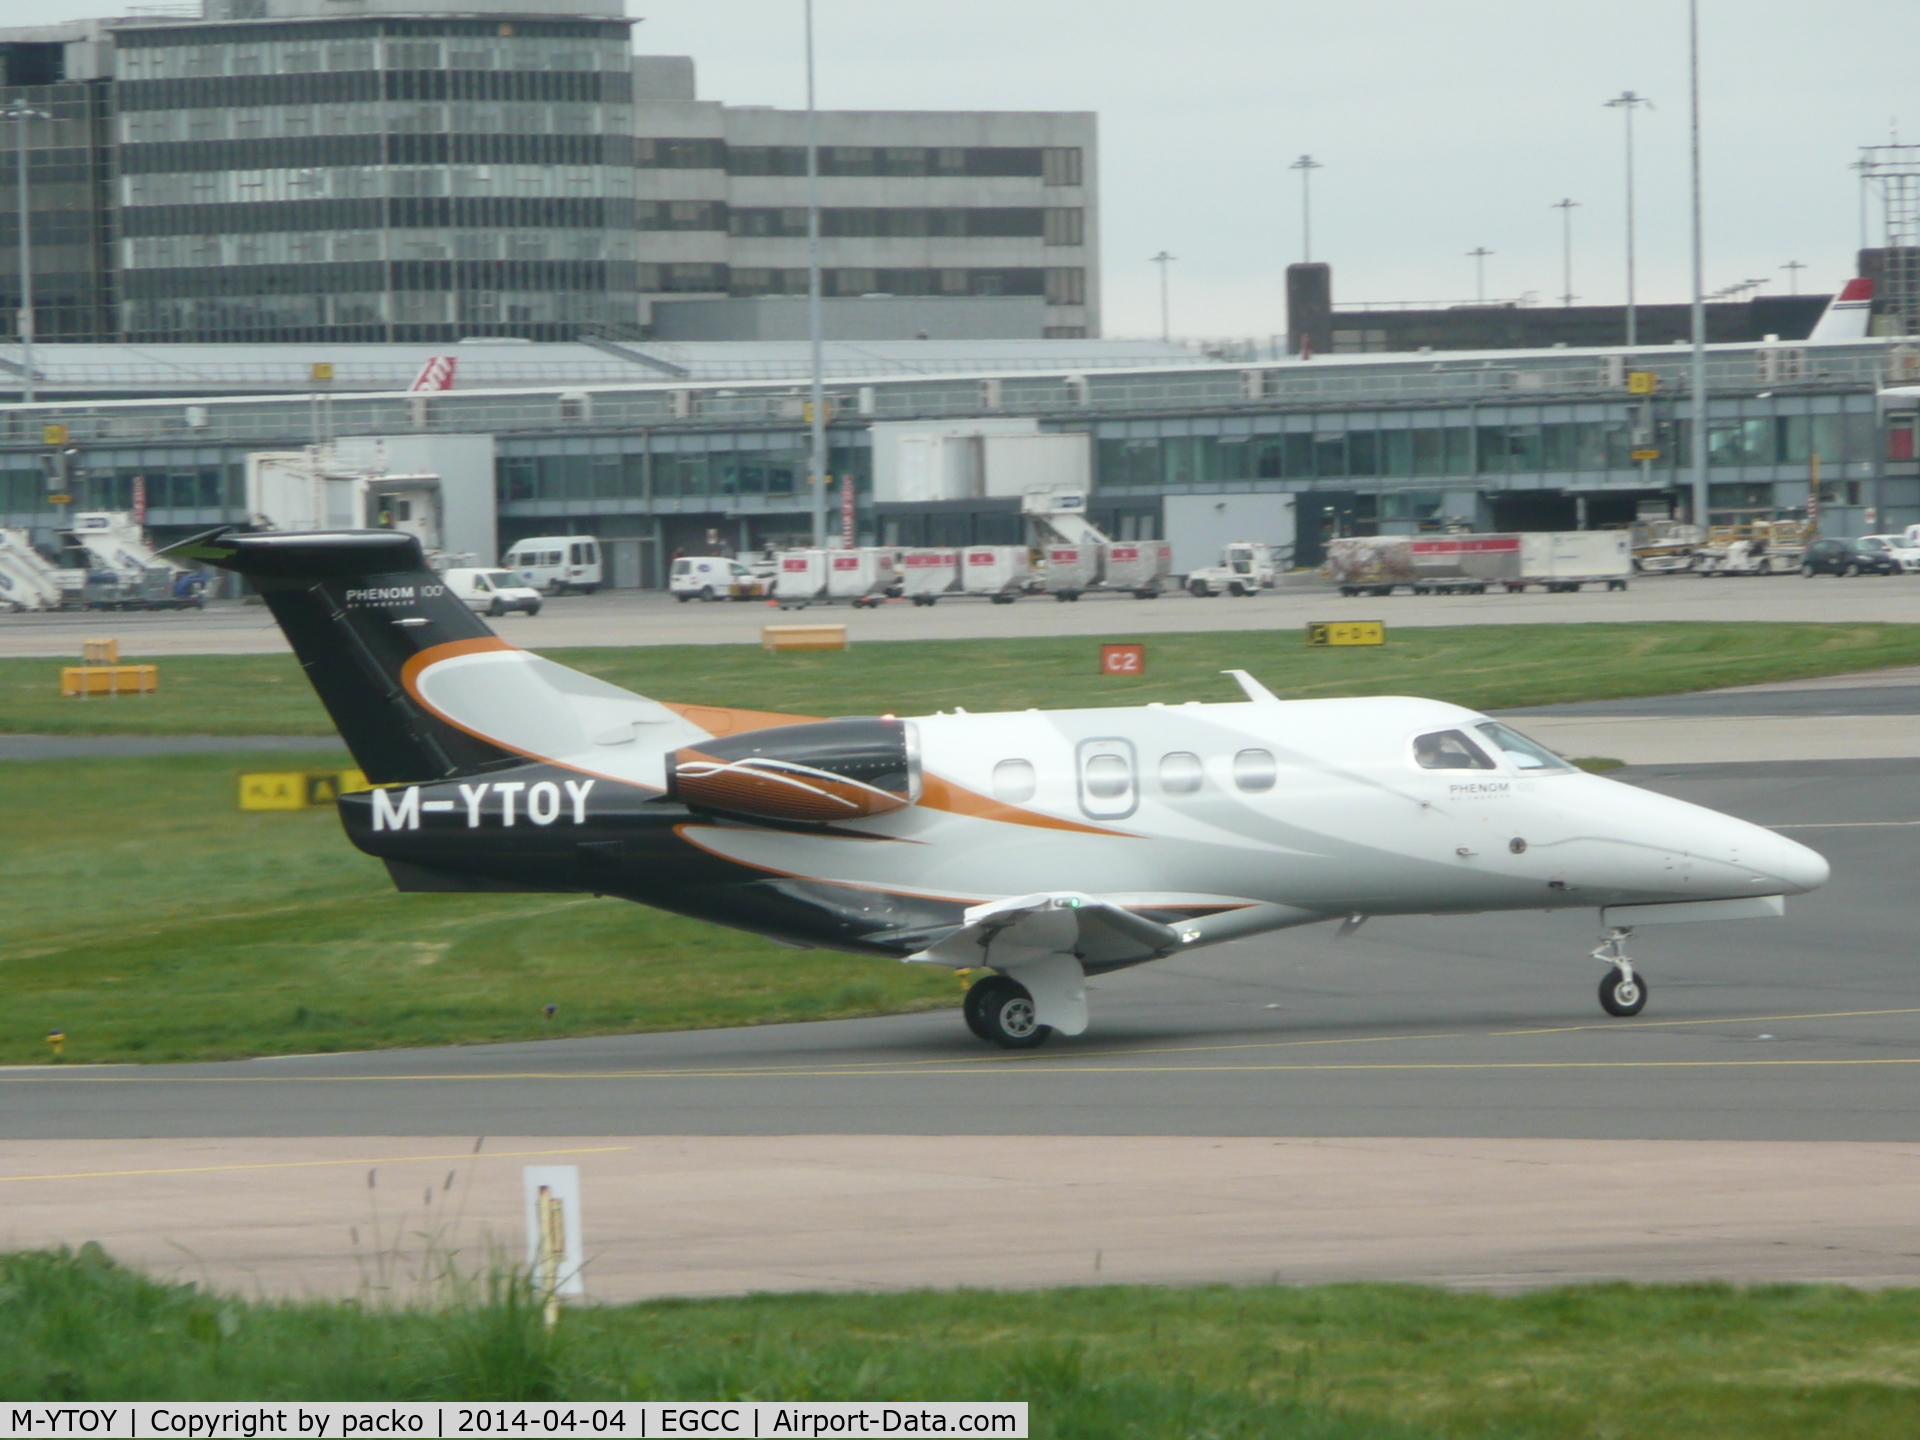 M-YTOY, 2009 Embraer EMB-500 Phenom 100 C/N 50000112, taken from the avp now off the OCS RAMP